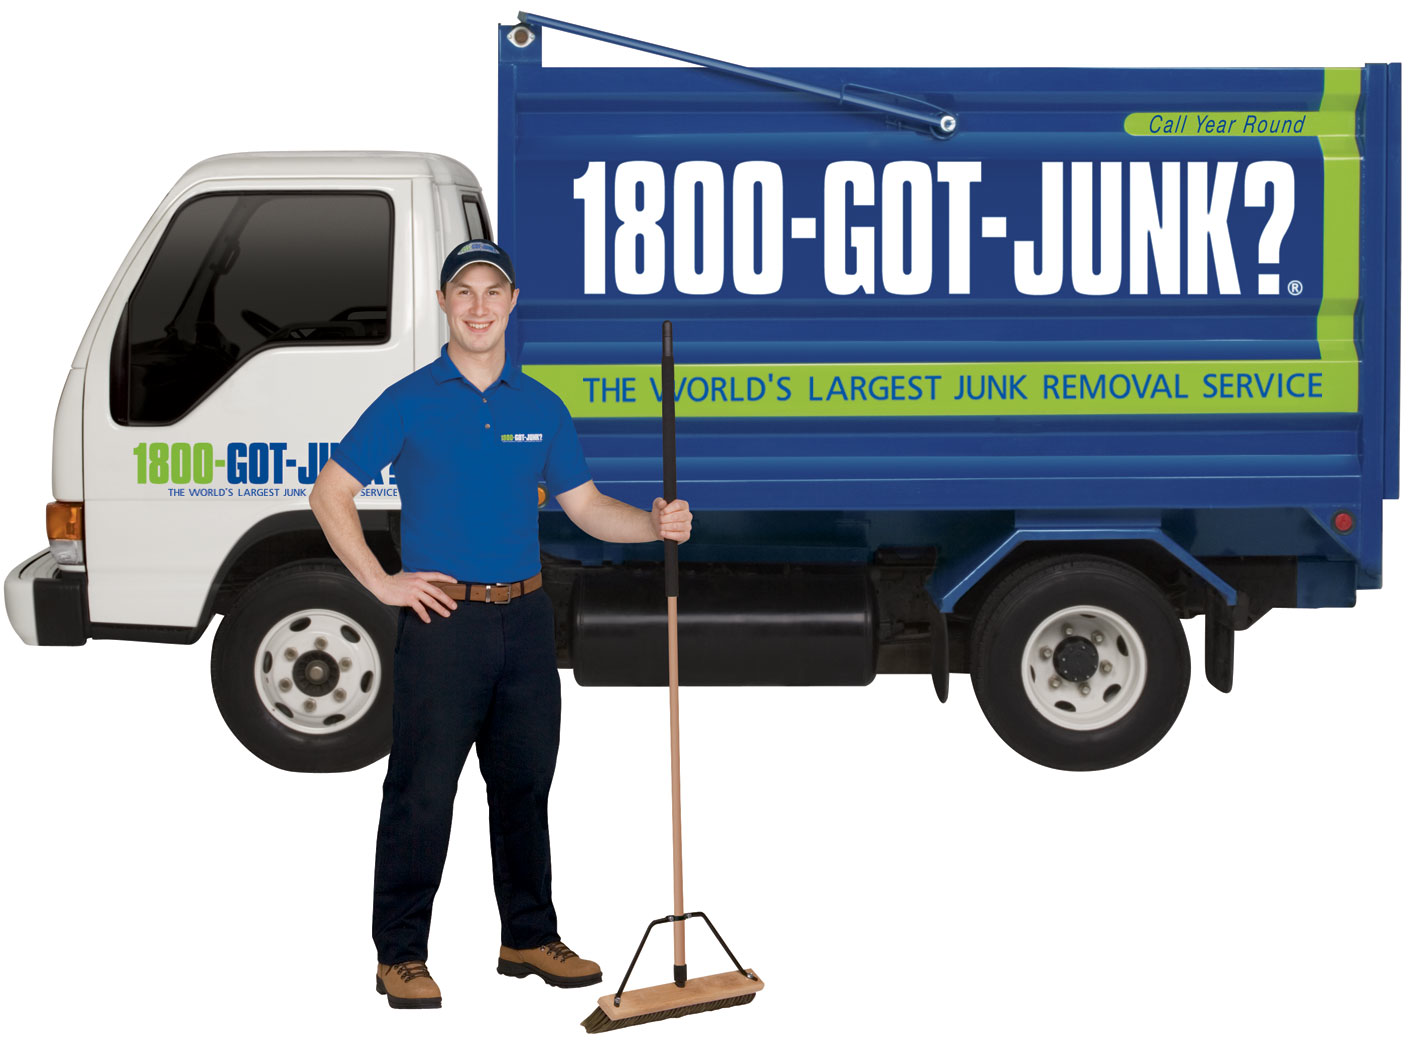 http://www.franchise-info.ca/1800-got-junk-with-truck.png